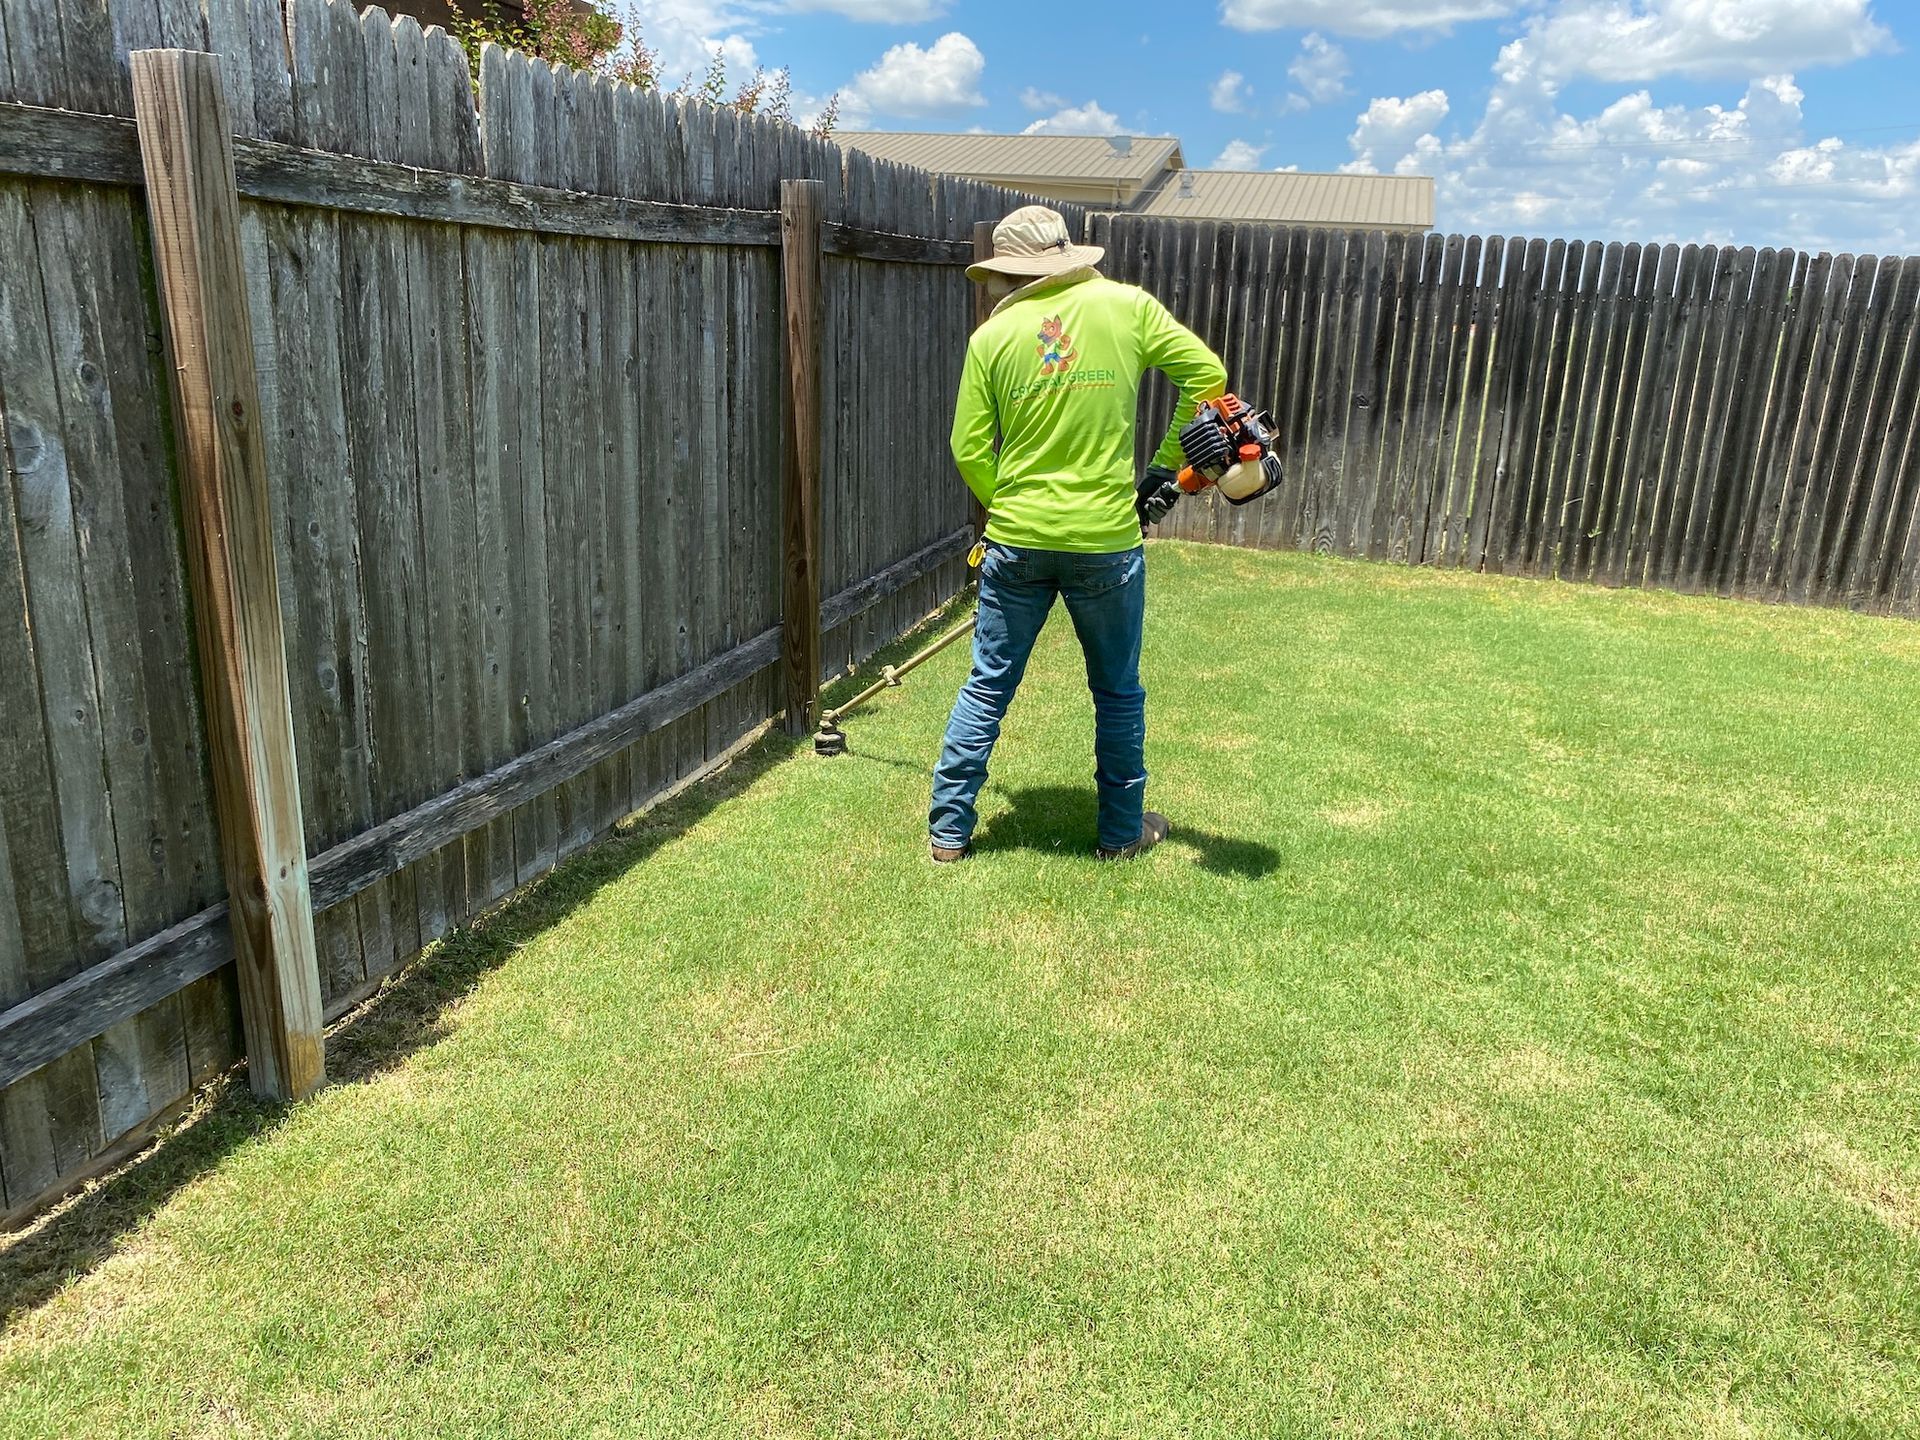 a man is standing in the grass holding a lawn mower .